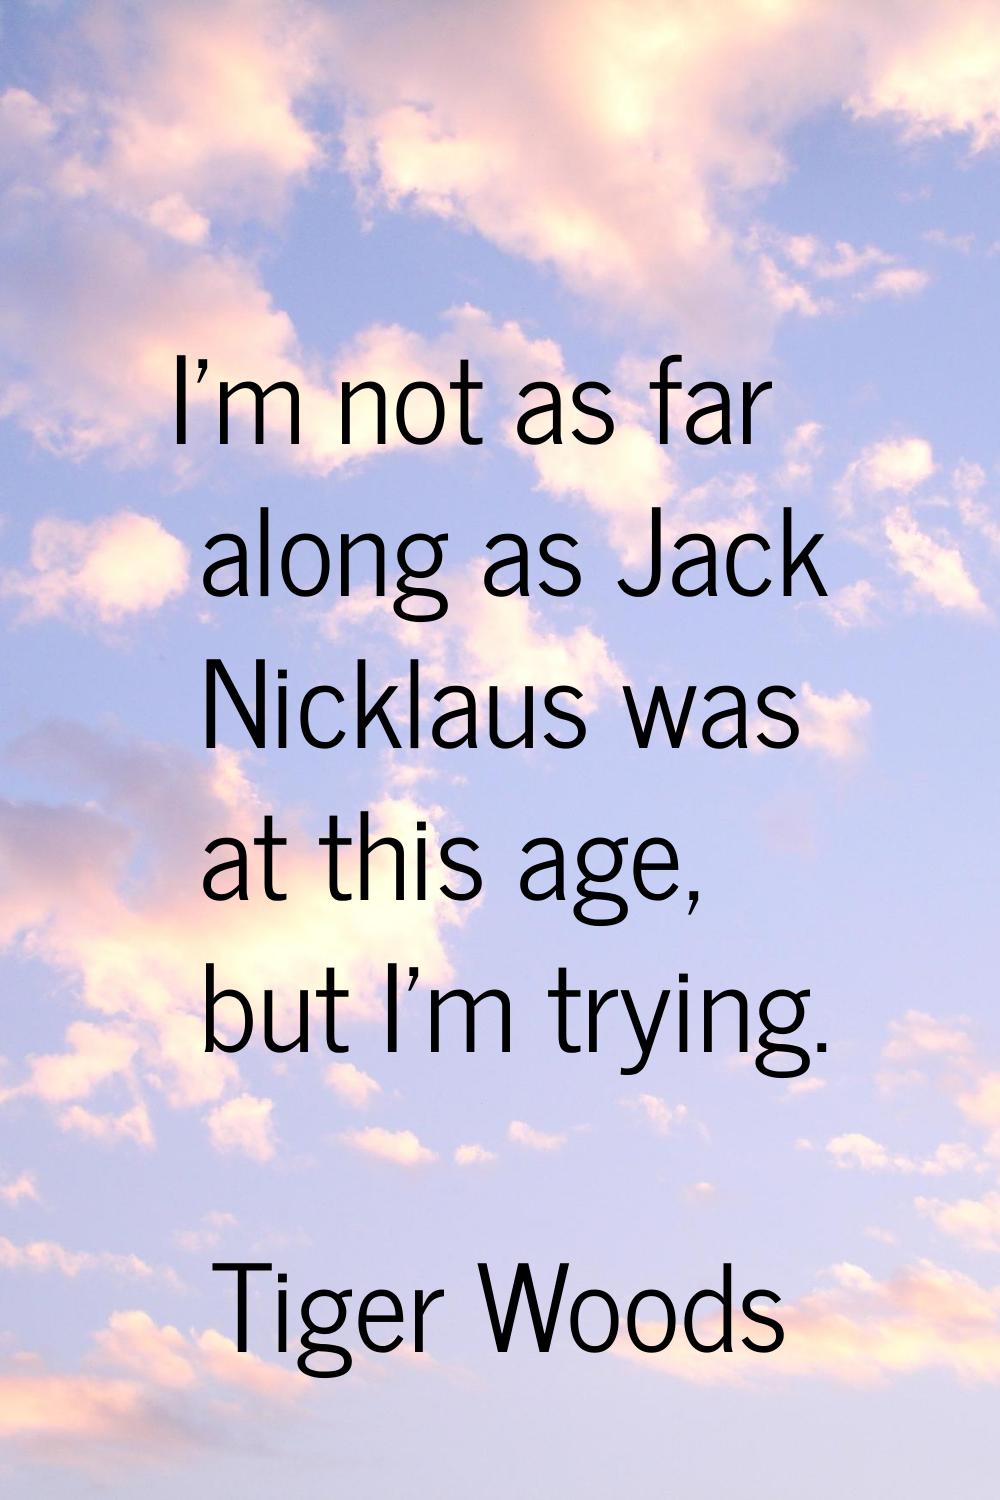 I'm not as far along as Jack Nicklaus was at this age, but I'm trying.